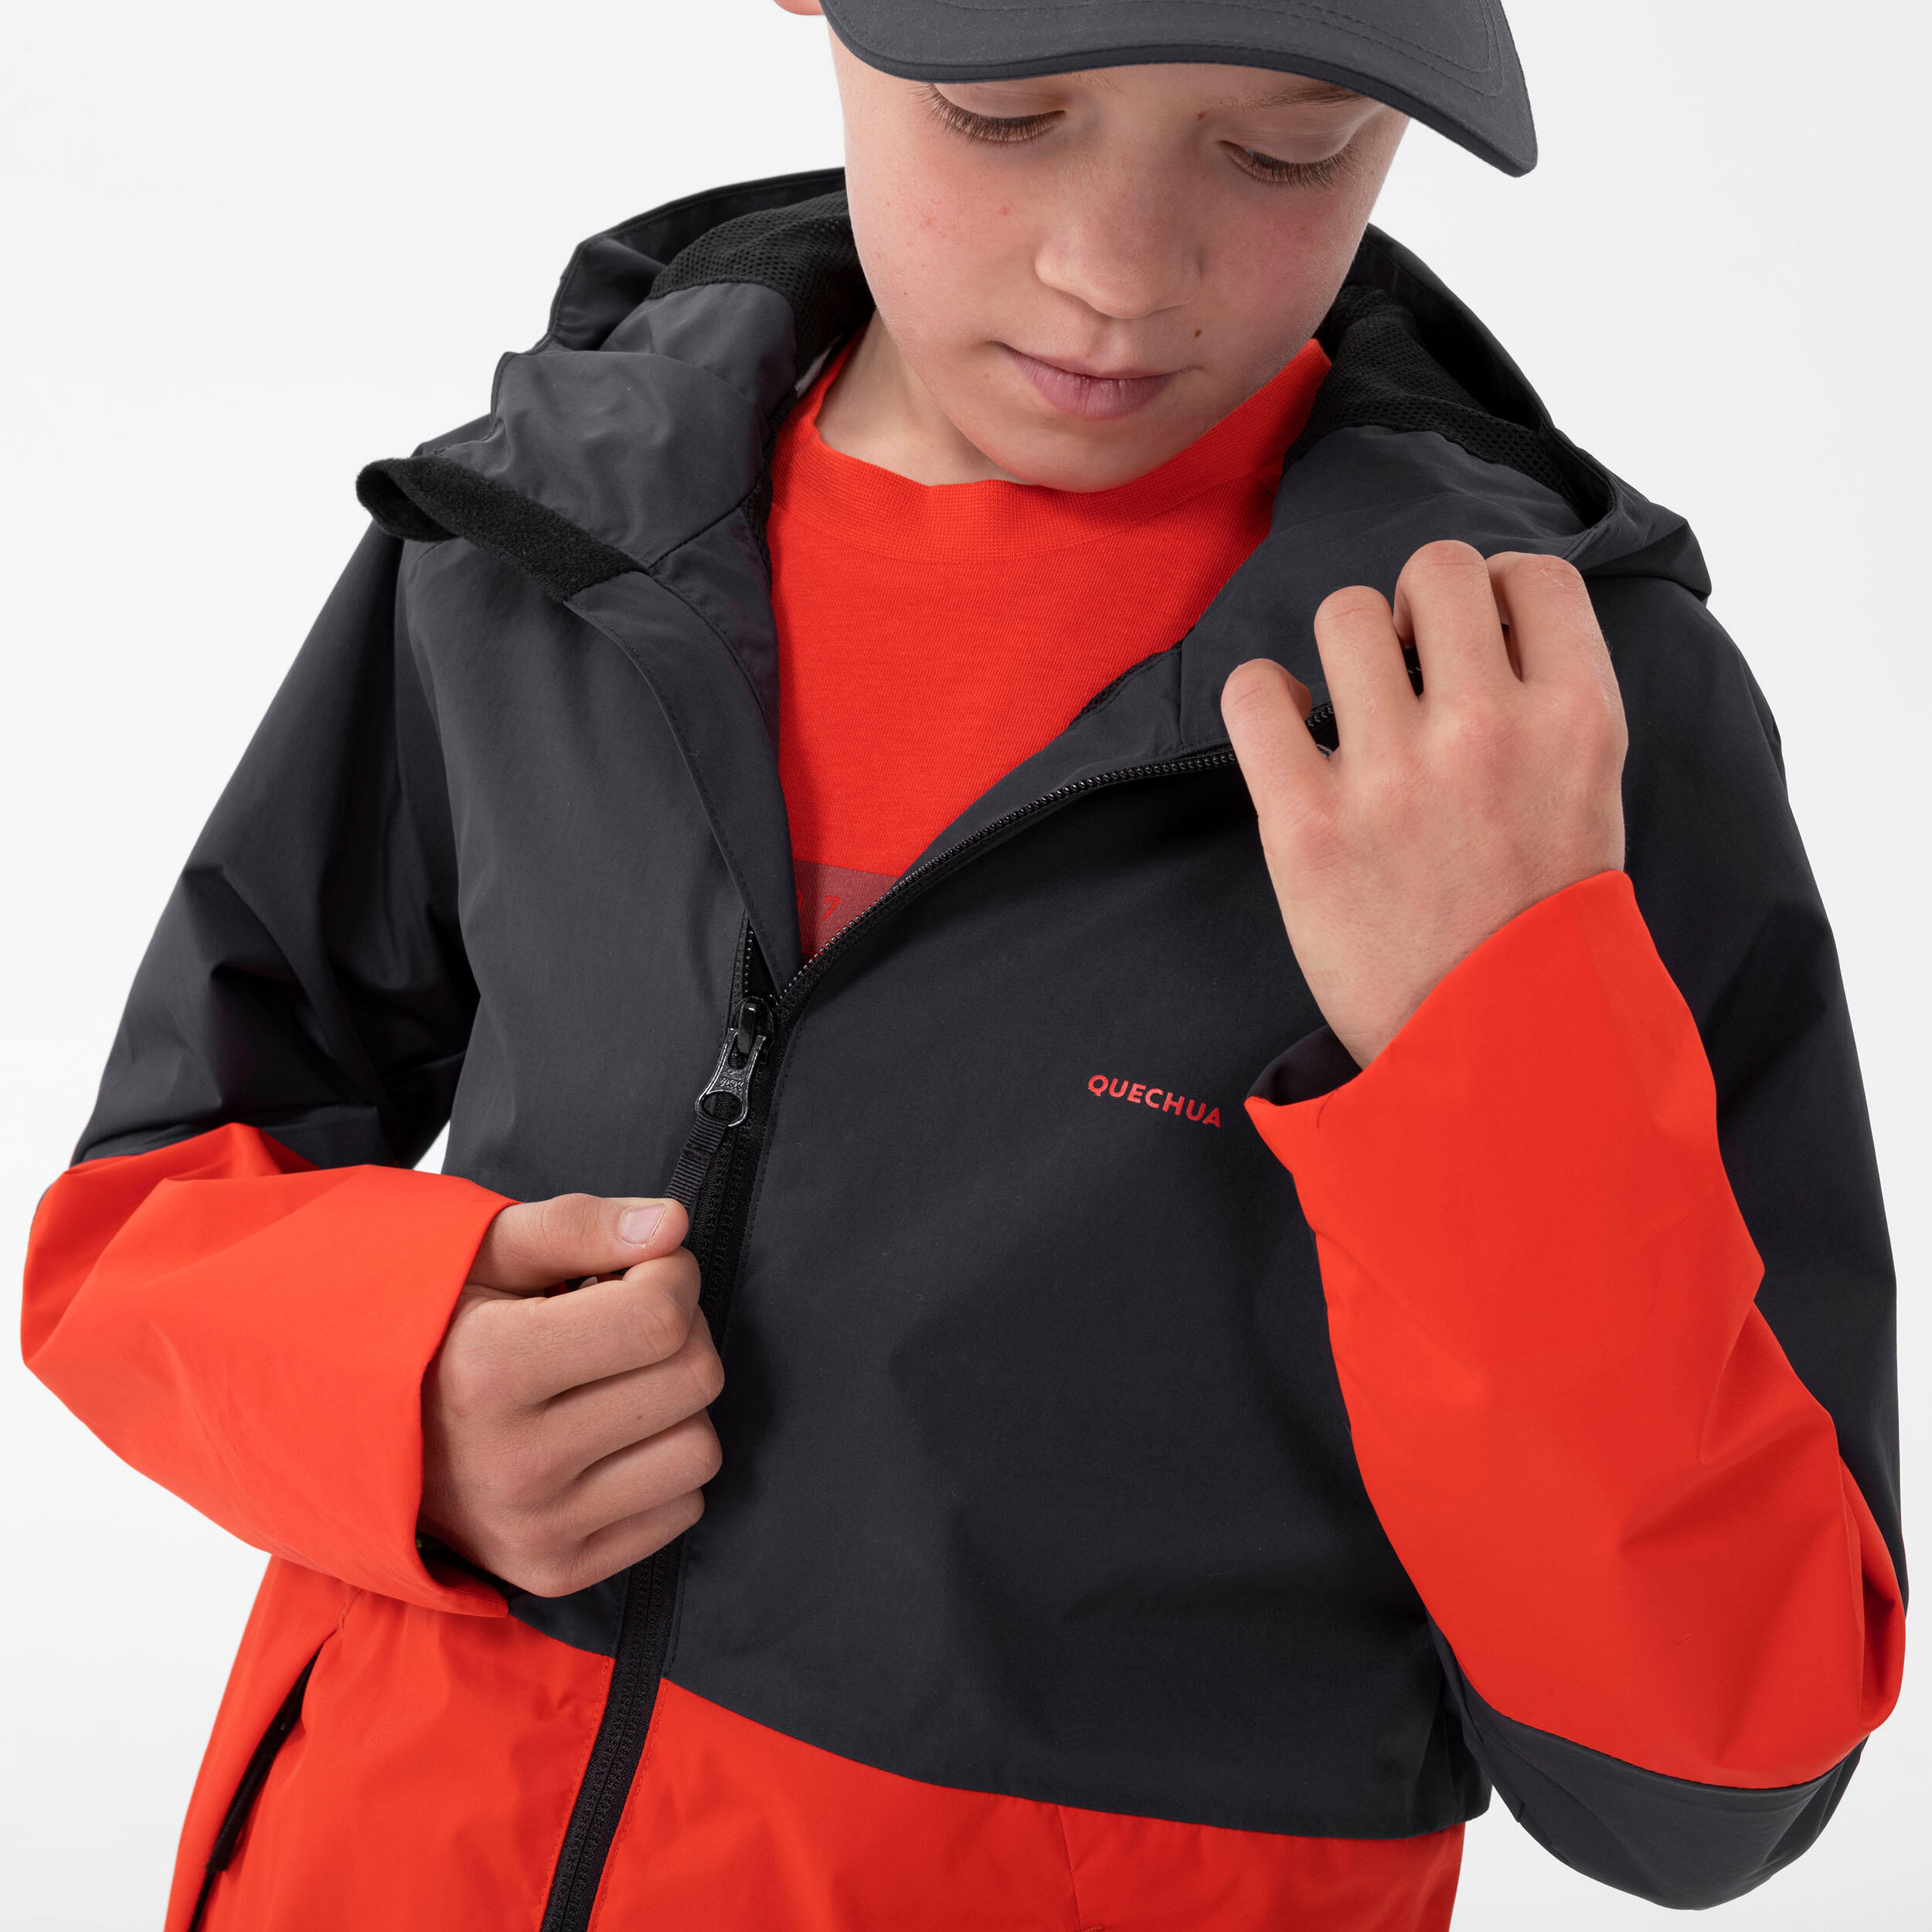 Kids’ Waterproof Hiking Jacket - MH500 Aged 7-15 - Grey and Red 7/9